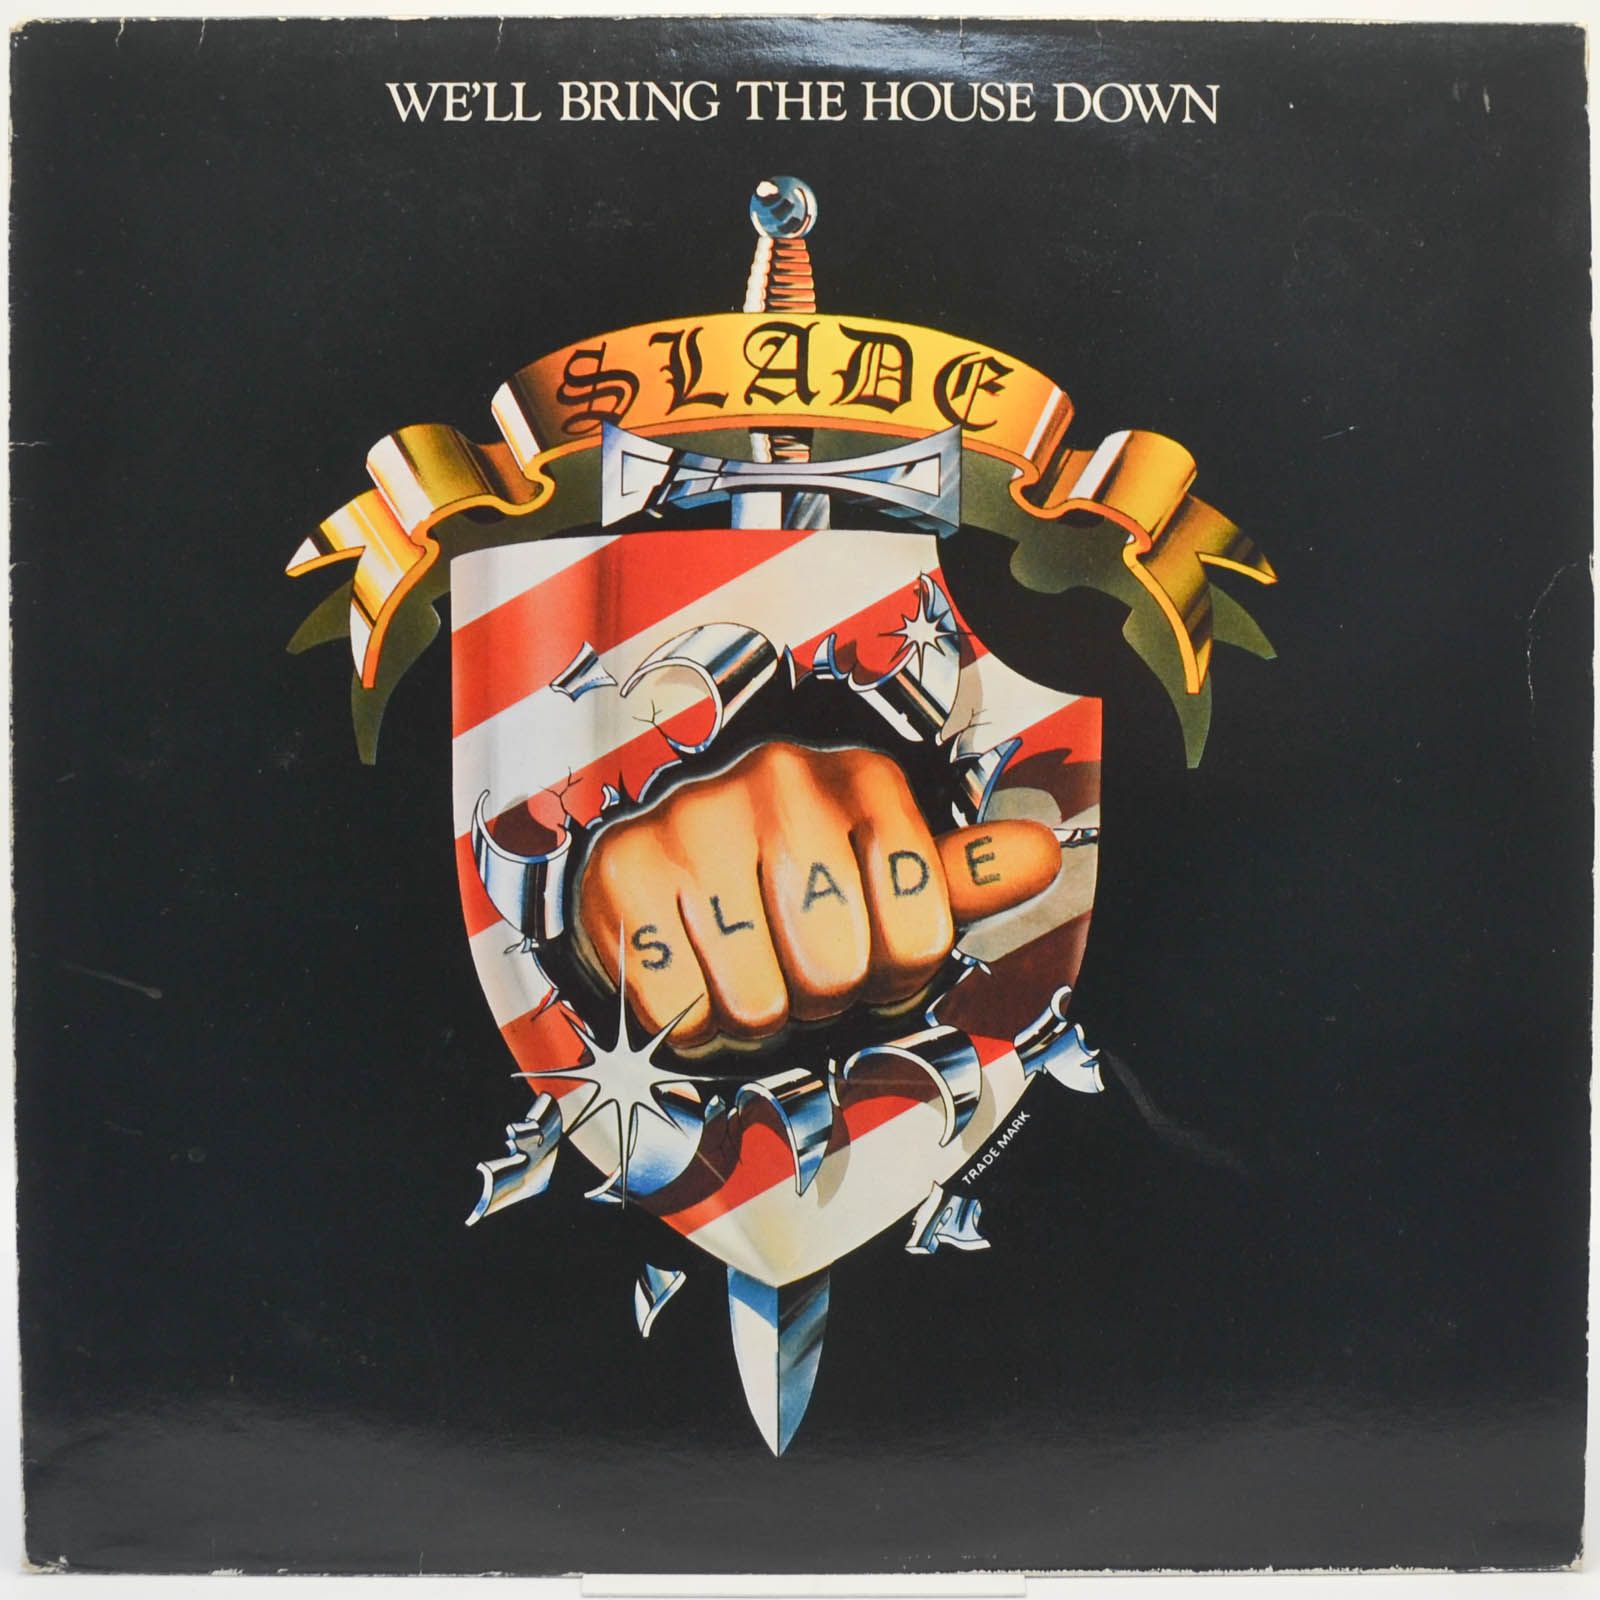 Slade — We'll Bring The House Down, 1981